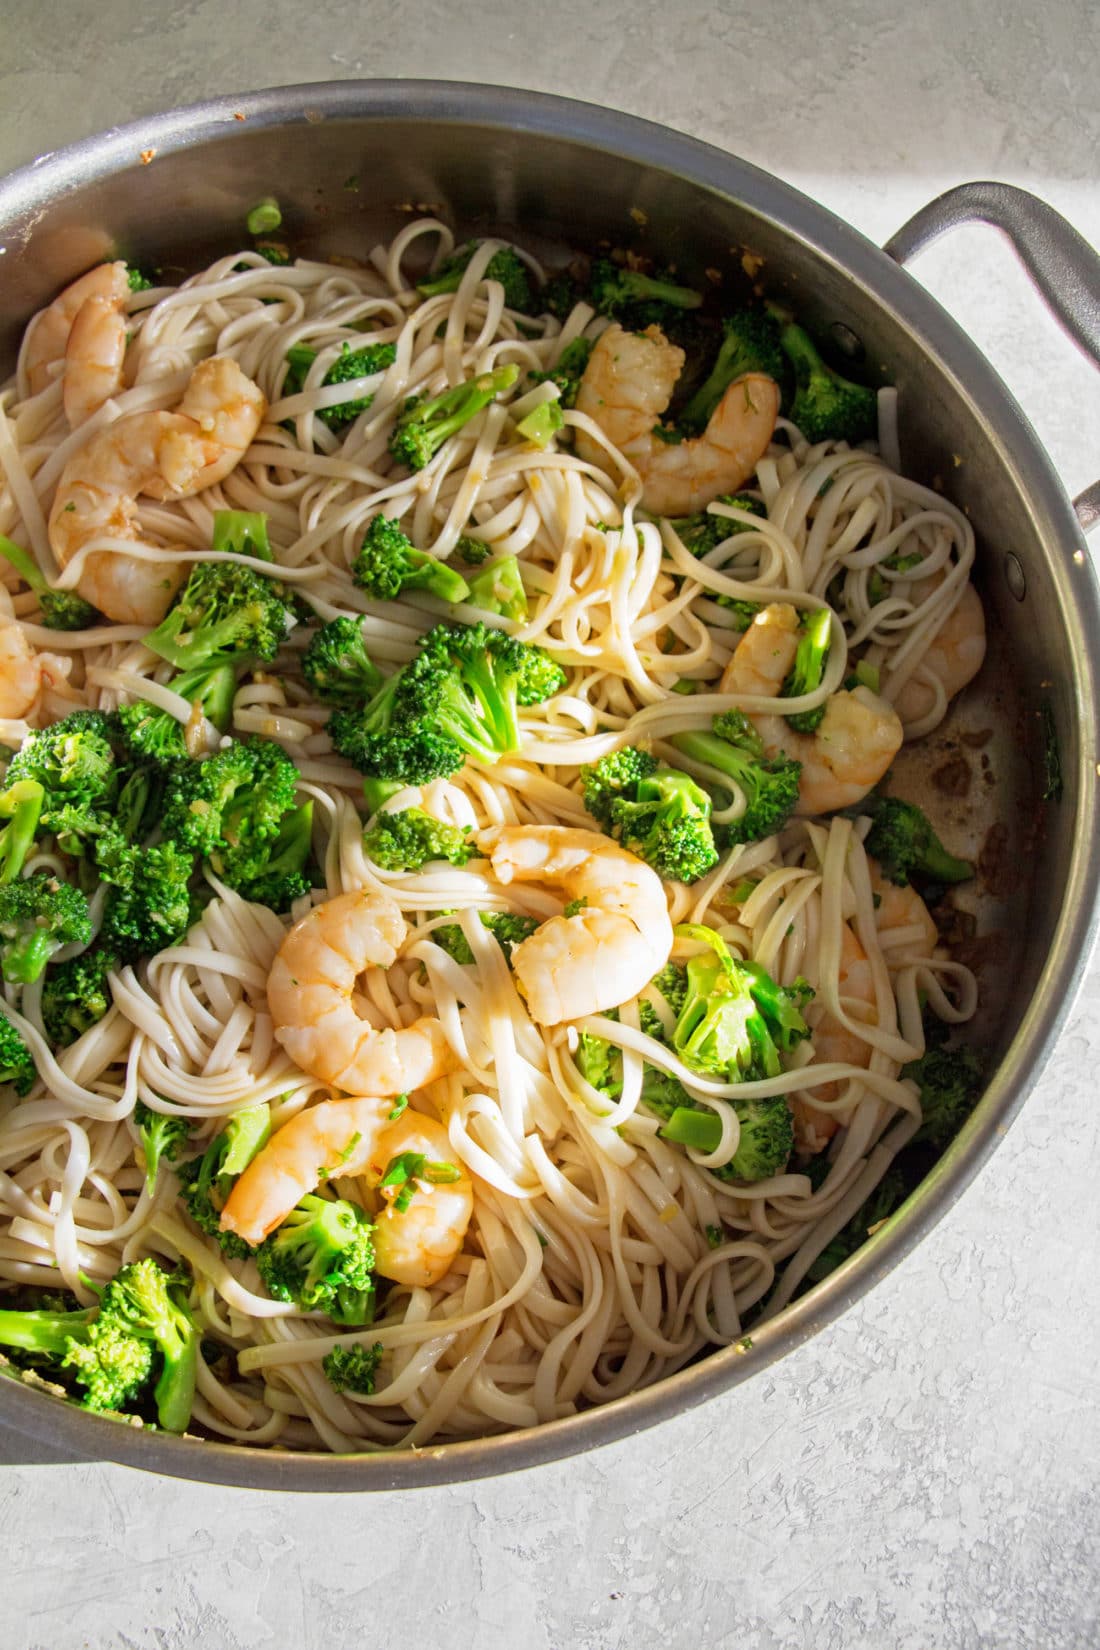 Pot of Shrimp and Broccoli Stir Fry with Udon Noodles.